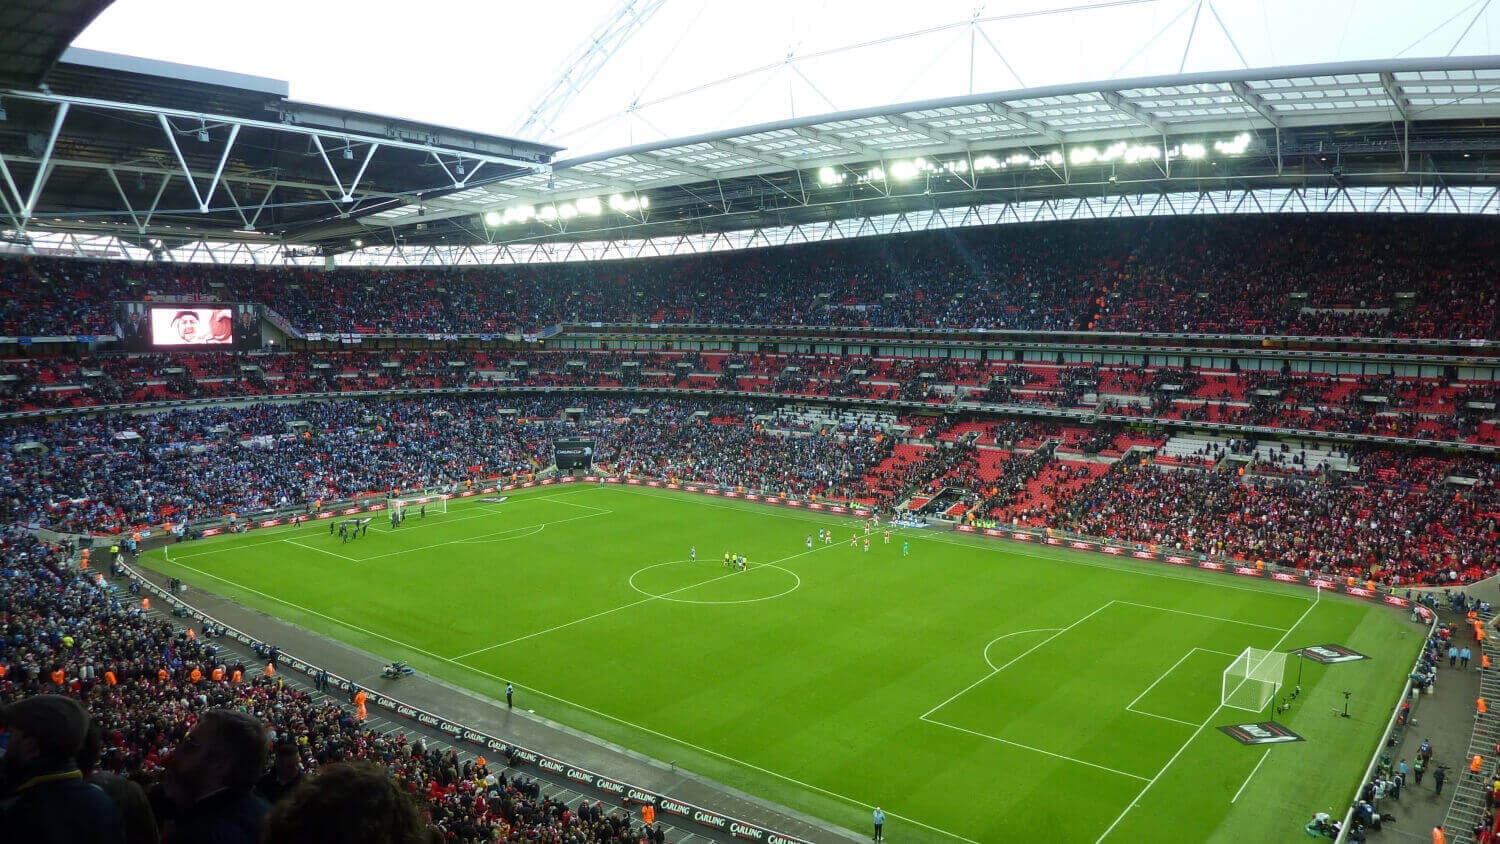 The Wembley Stadium is packed with football fans right before the match starts